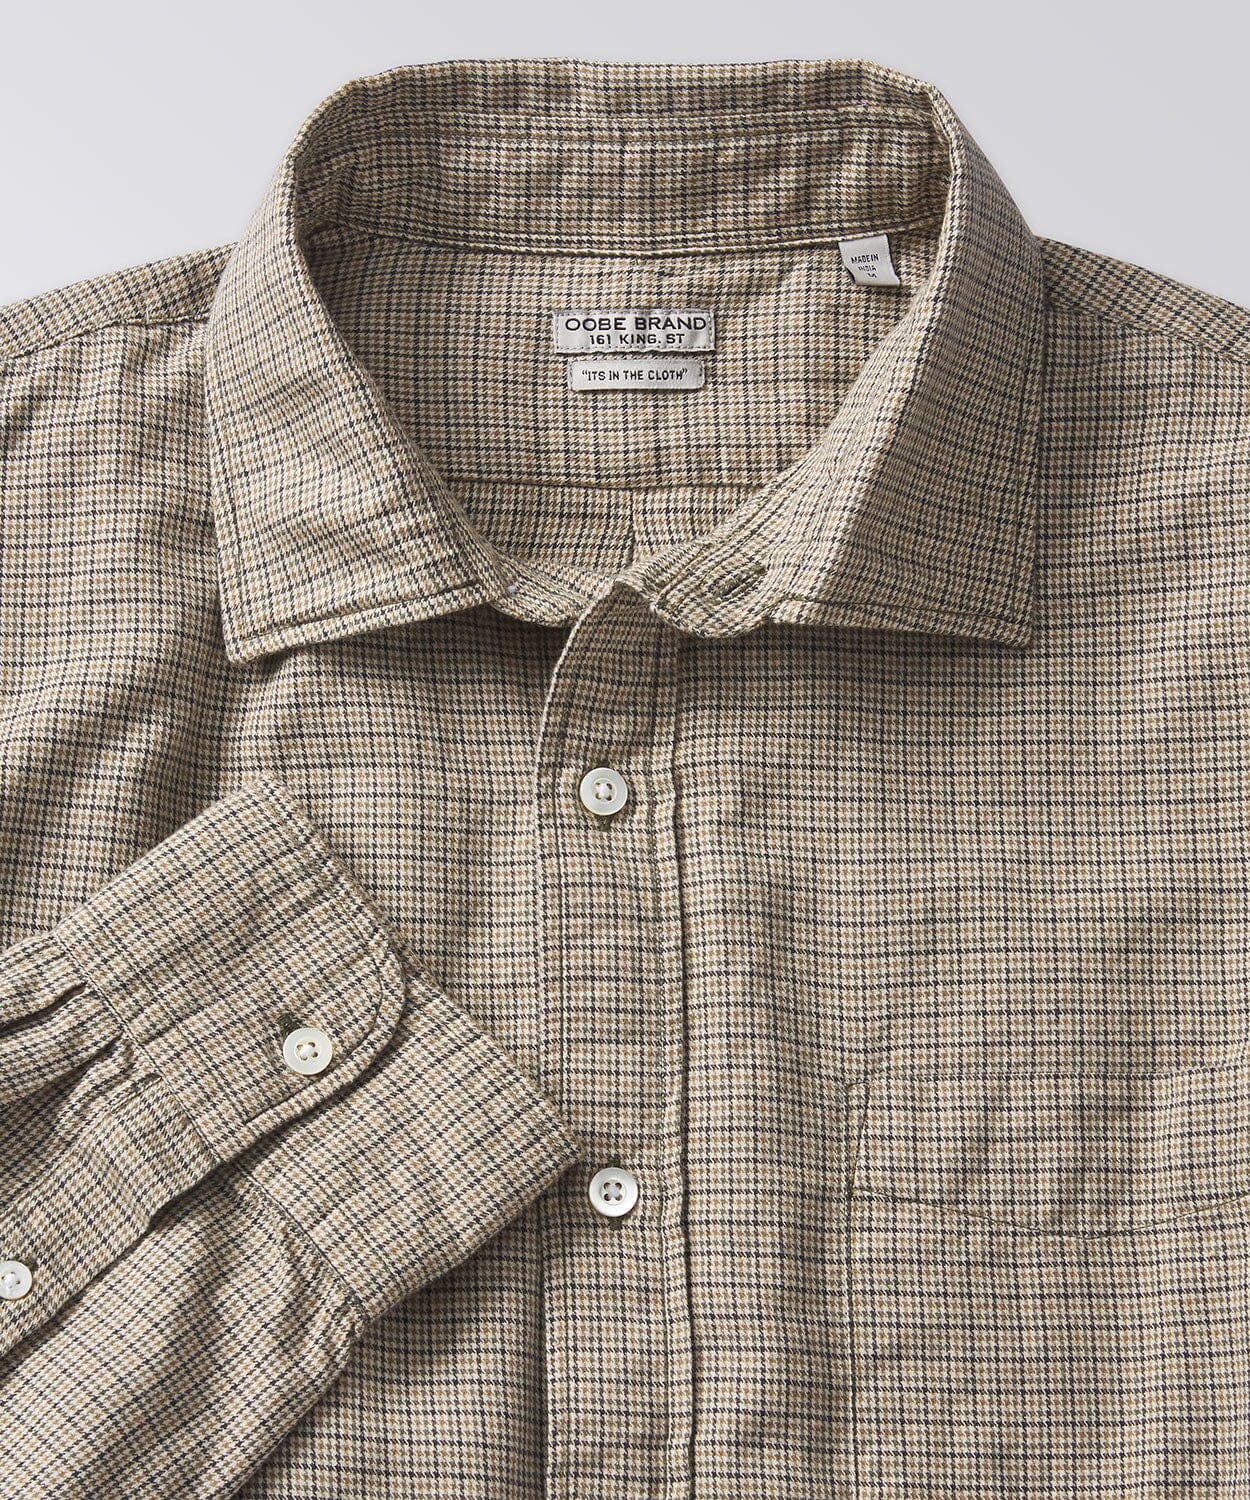 Excella Brushed Heather Plaid Shirt Button Downs OOBE BRAND 